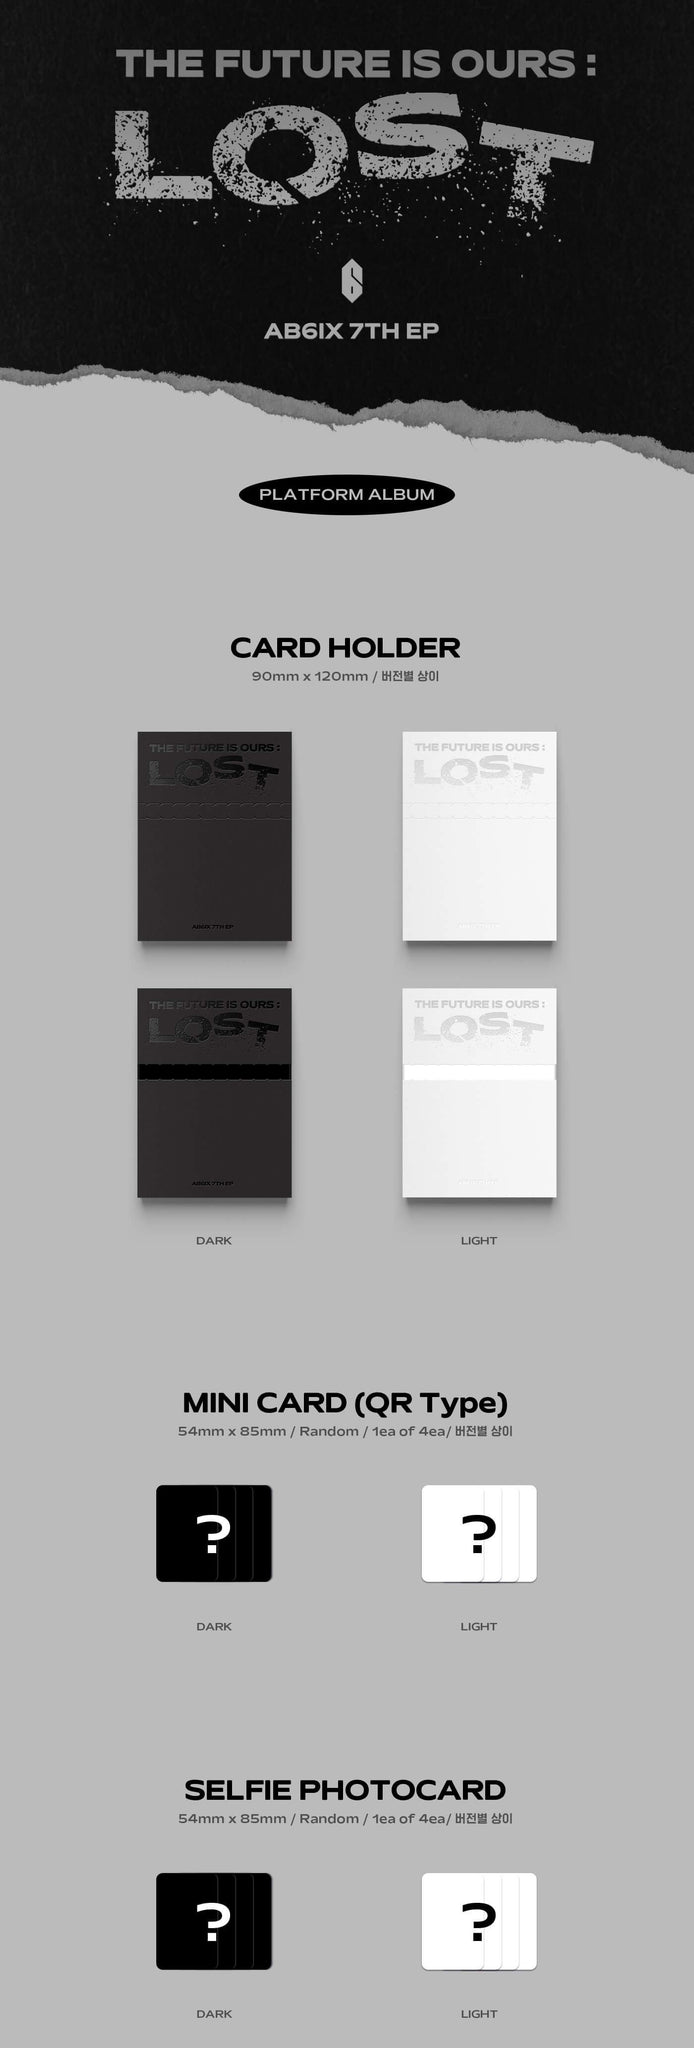 AB6IX THE FUTURE IS OURS : LOST (Platform Ver.) Inclusions Card Holder Mini Card QR Type Selfie Photocard